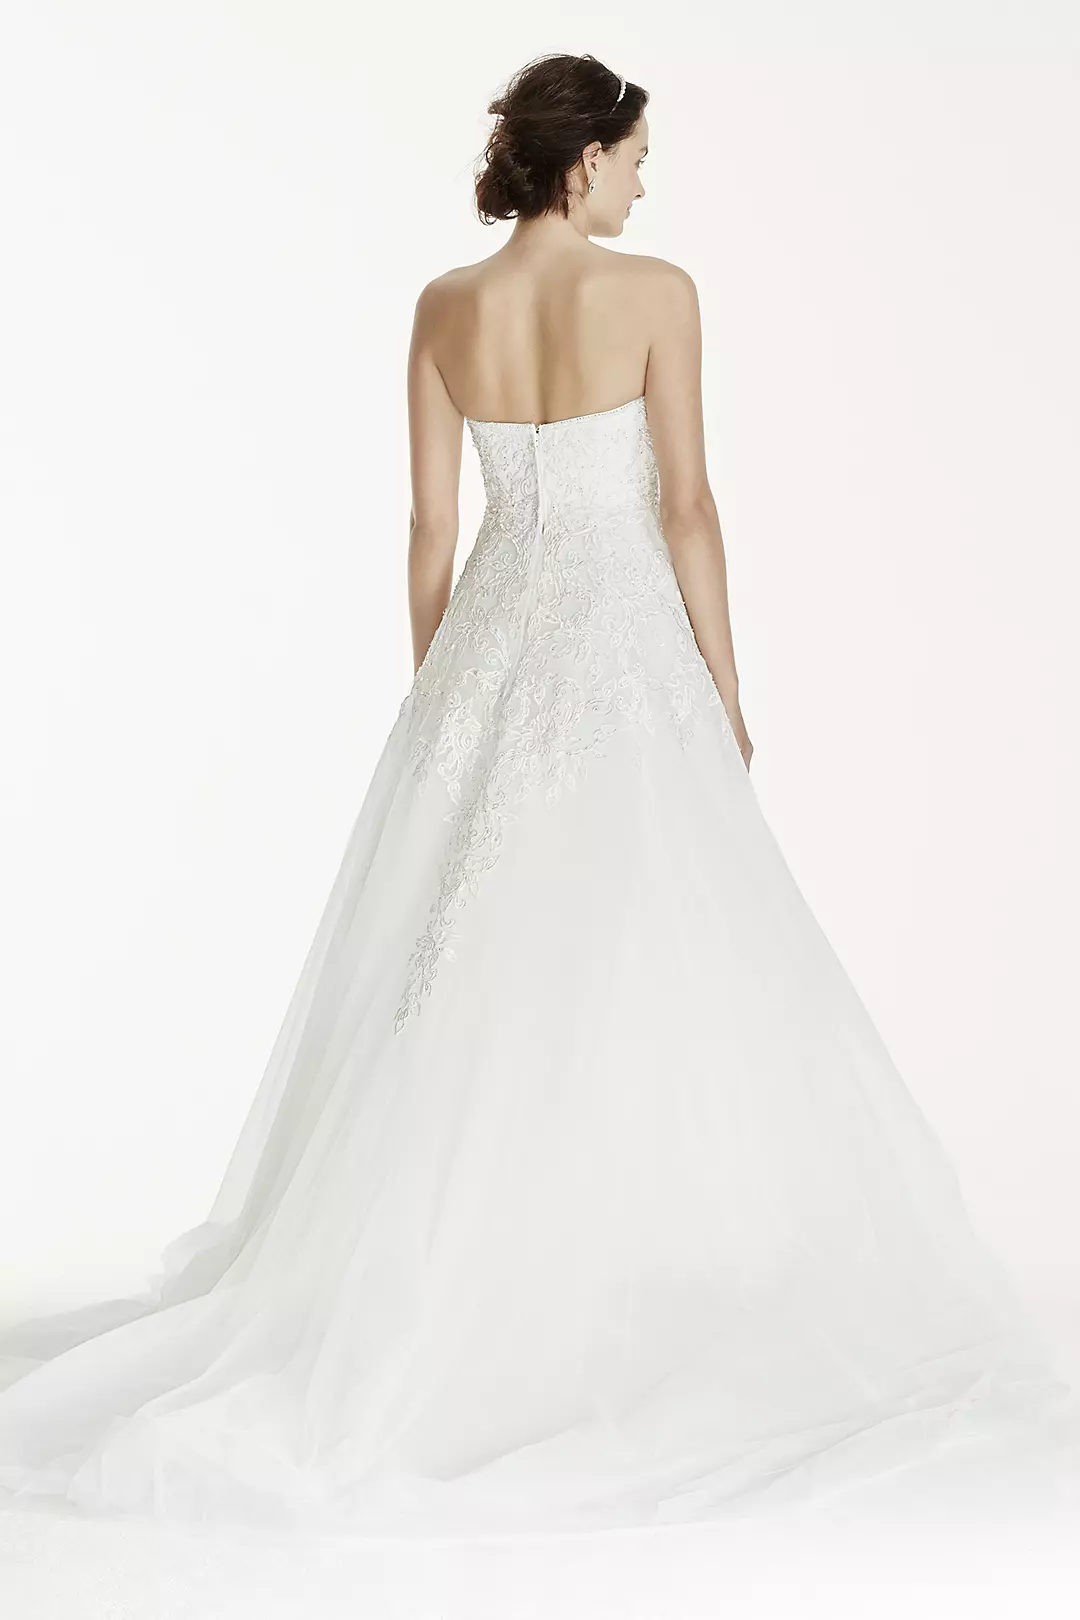 As-Is Jewel Tulle Wedding Dress with Lace Applique Image 2